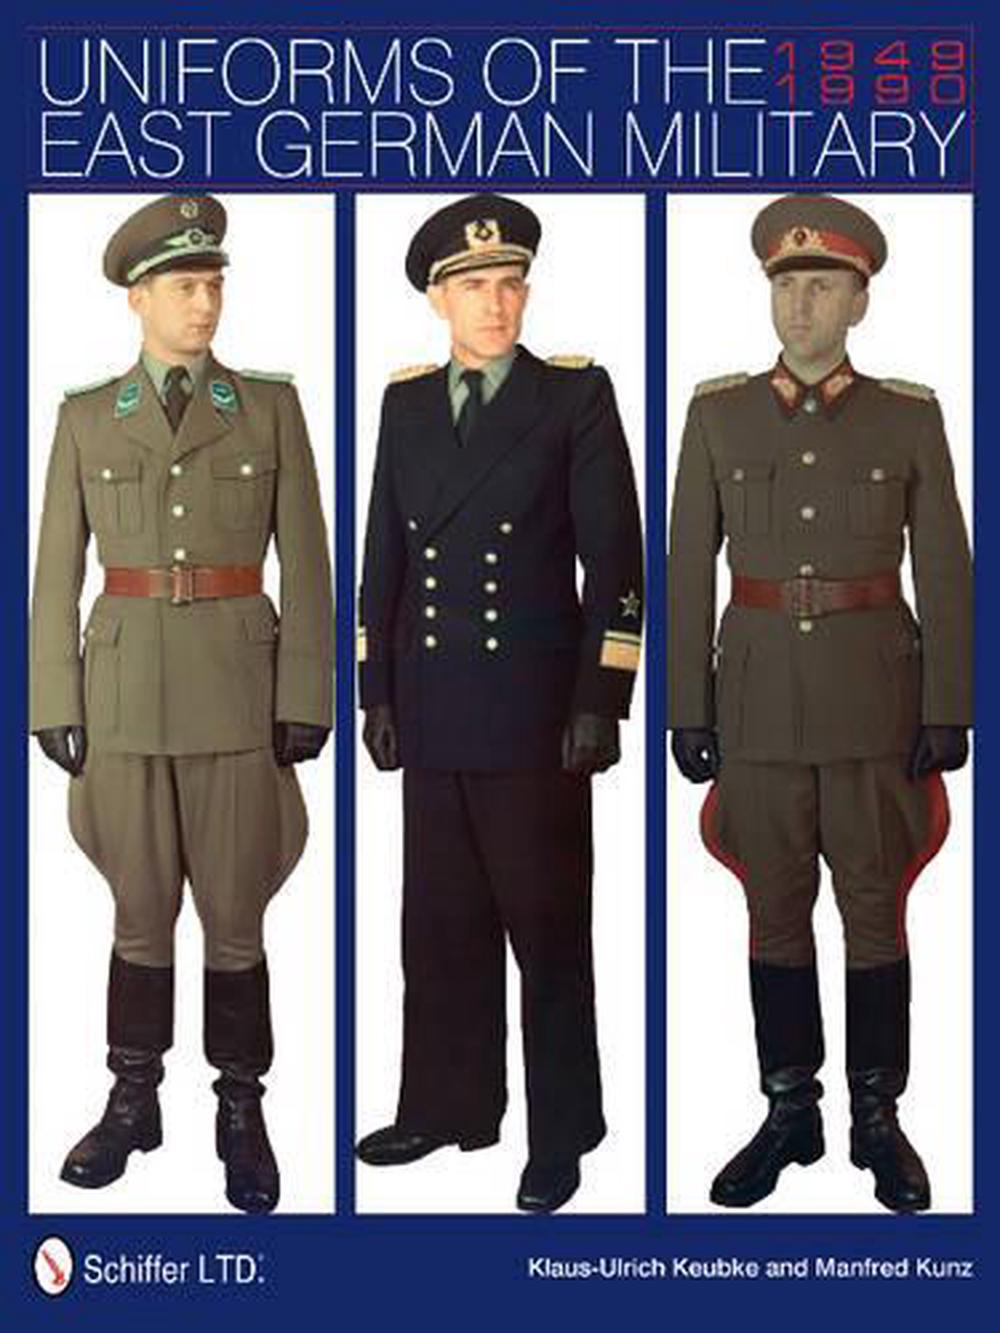 Uniforms of the East German Military by Klaus-Ulrich Keubke, Hardcover ...